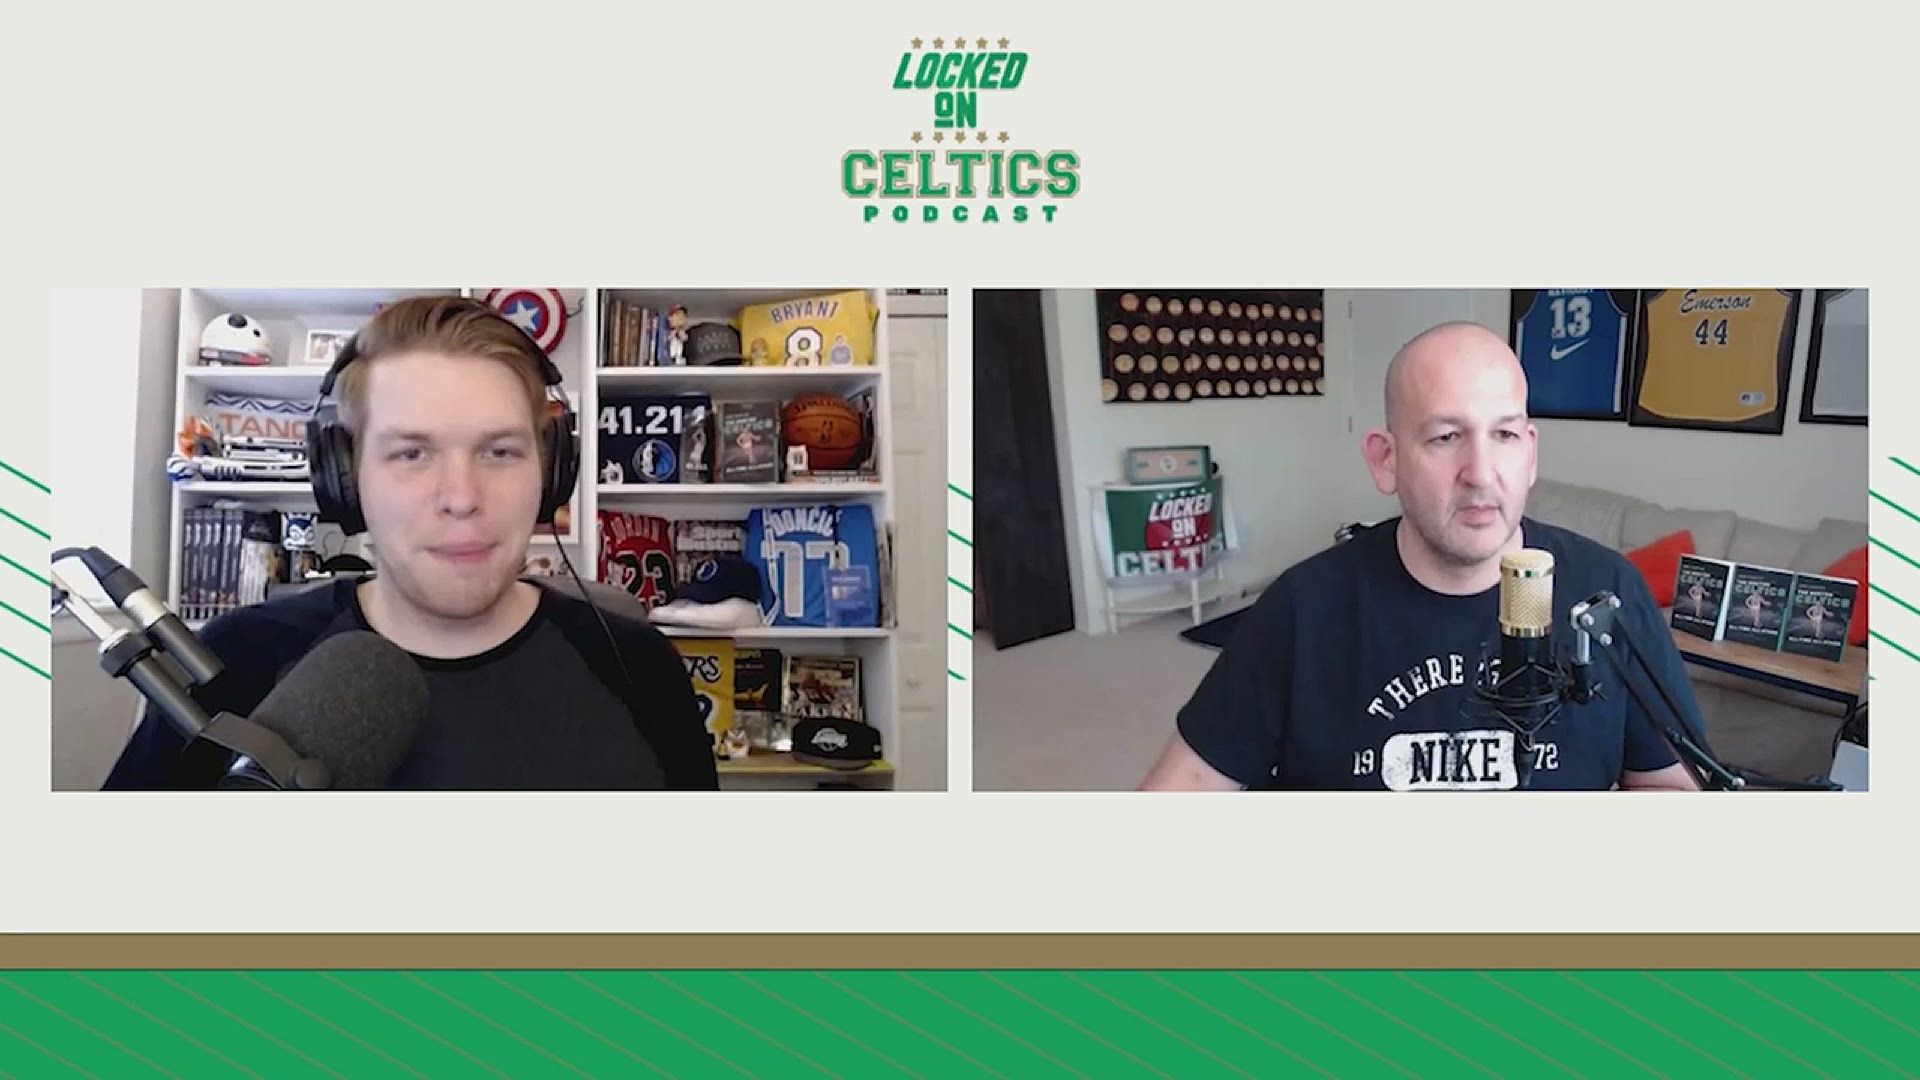 John Karalis of the Locked On Celtics podcast talks about the upcoming 2021 NBA Play-In game against the Washington Wizards